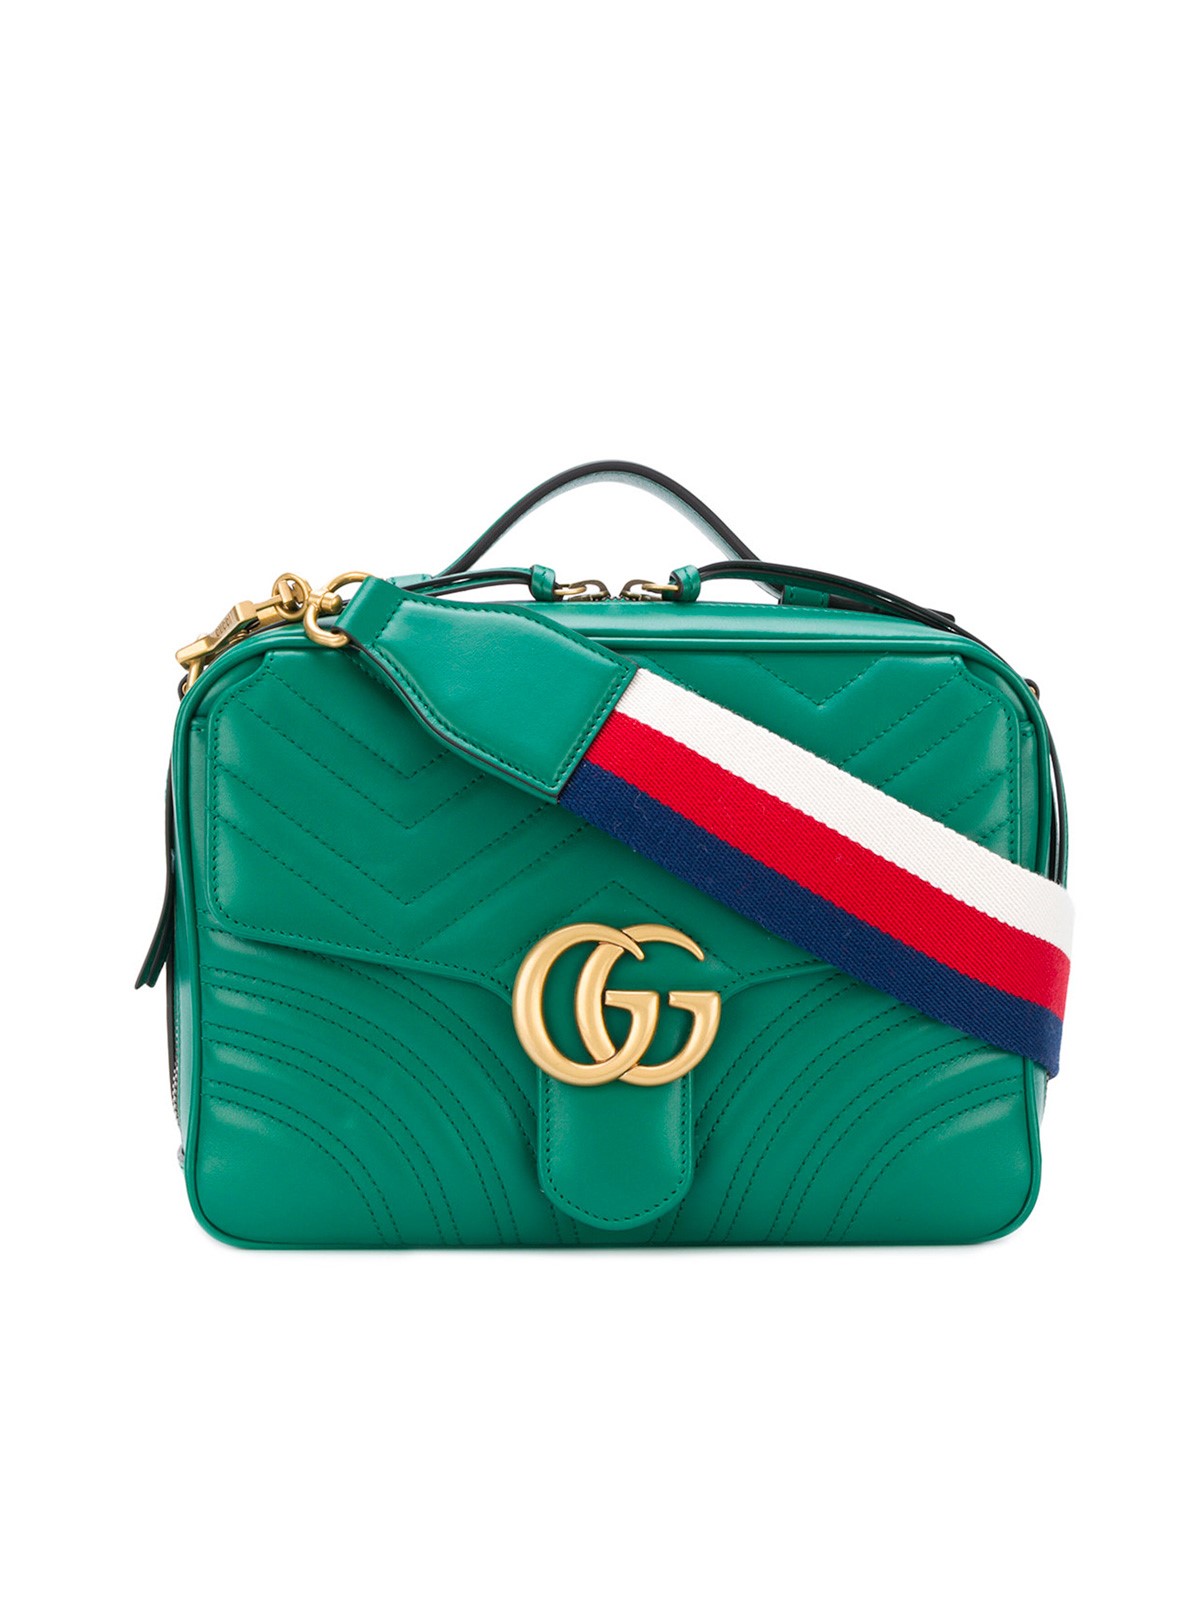 gucci GG MARMONT SHOULDER BAG available on www.bagssaleusa.com - 21477